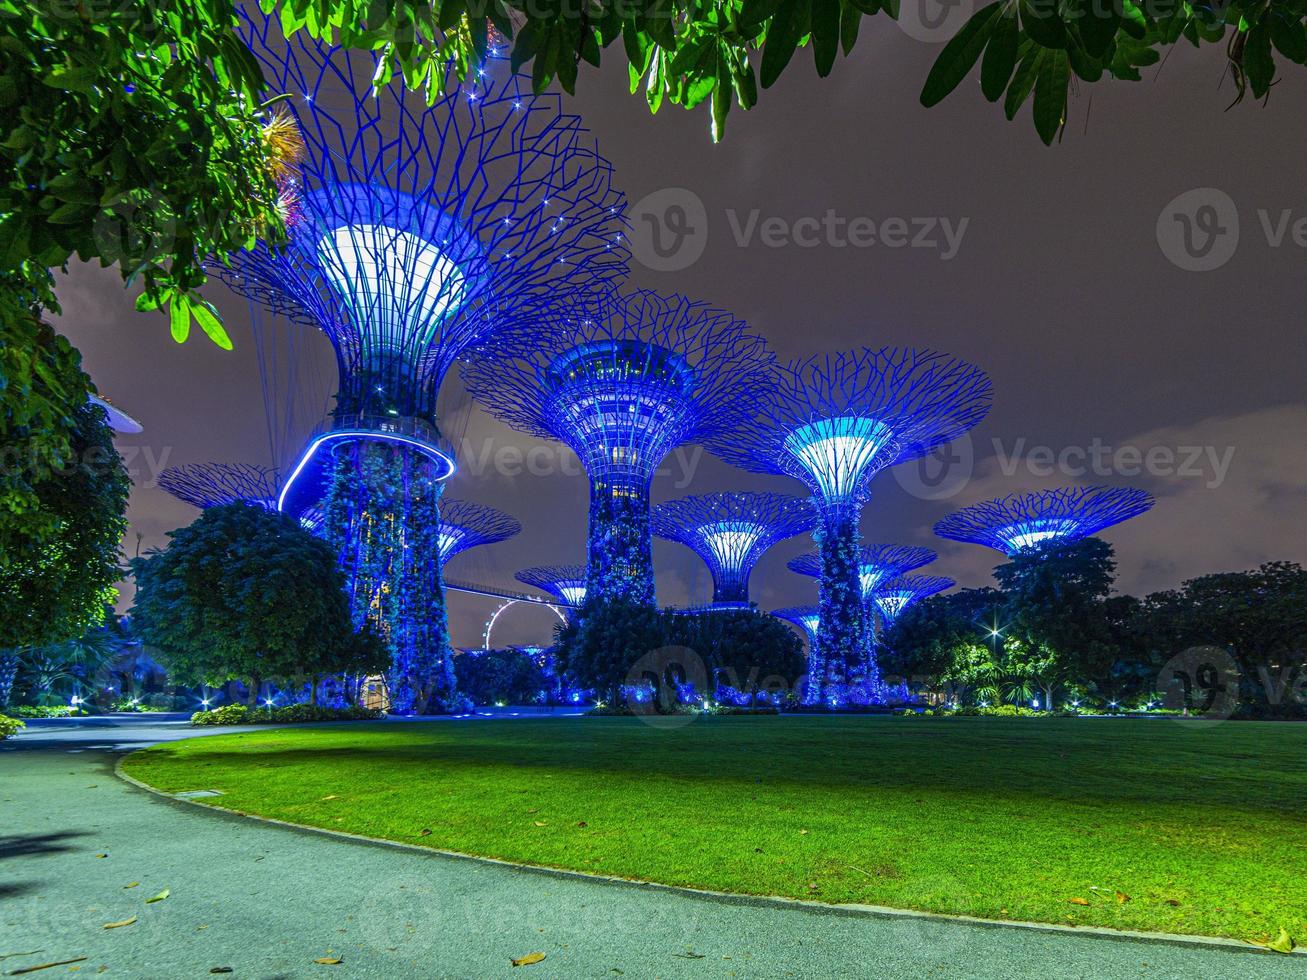 Picture of Gardens by the bay park in Singapore during nighttime in September photo